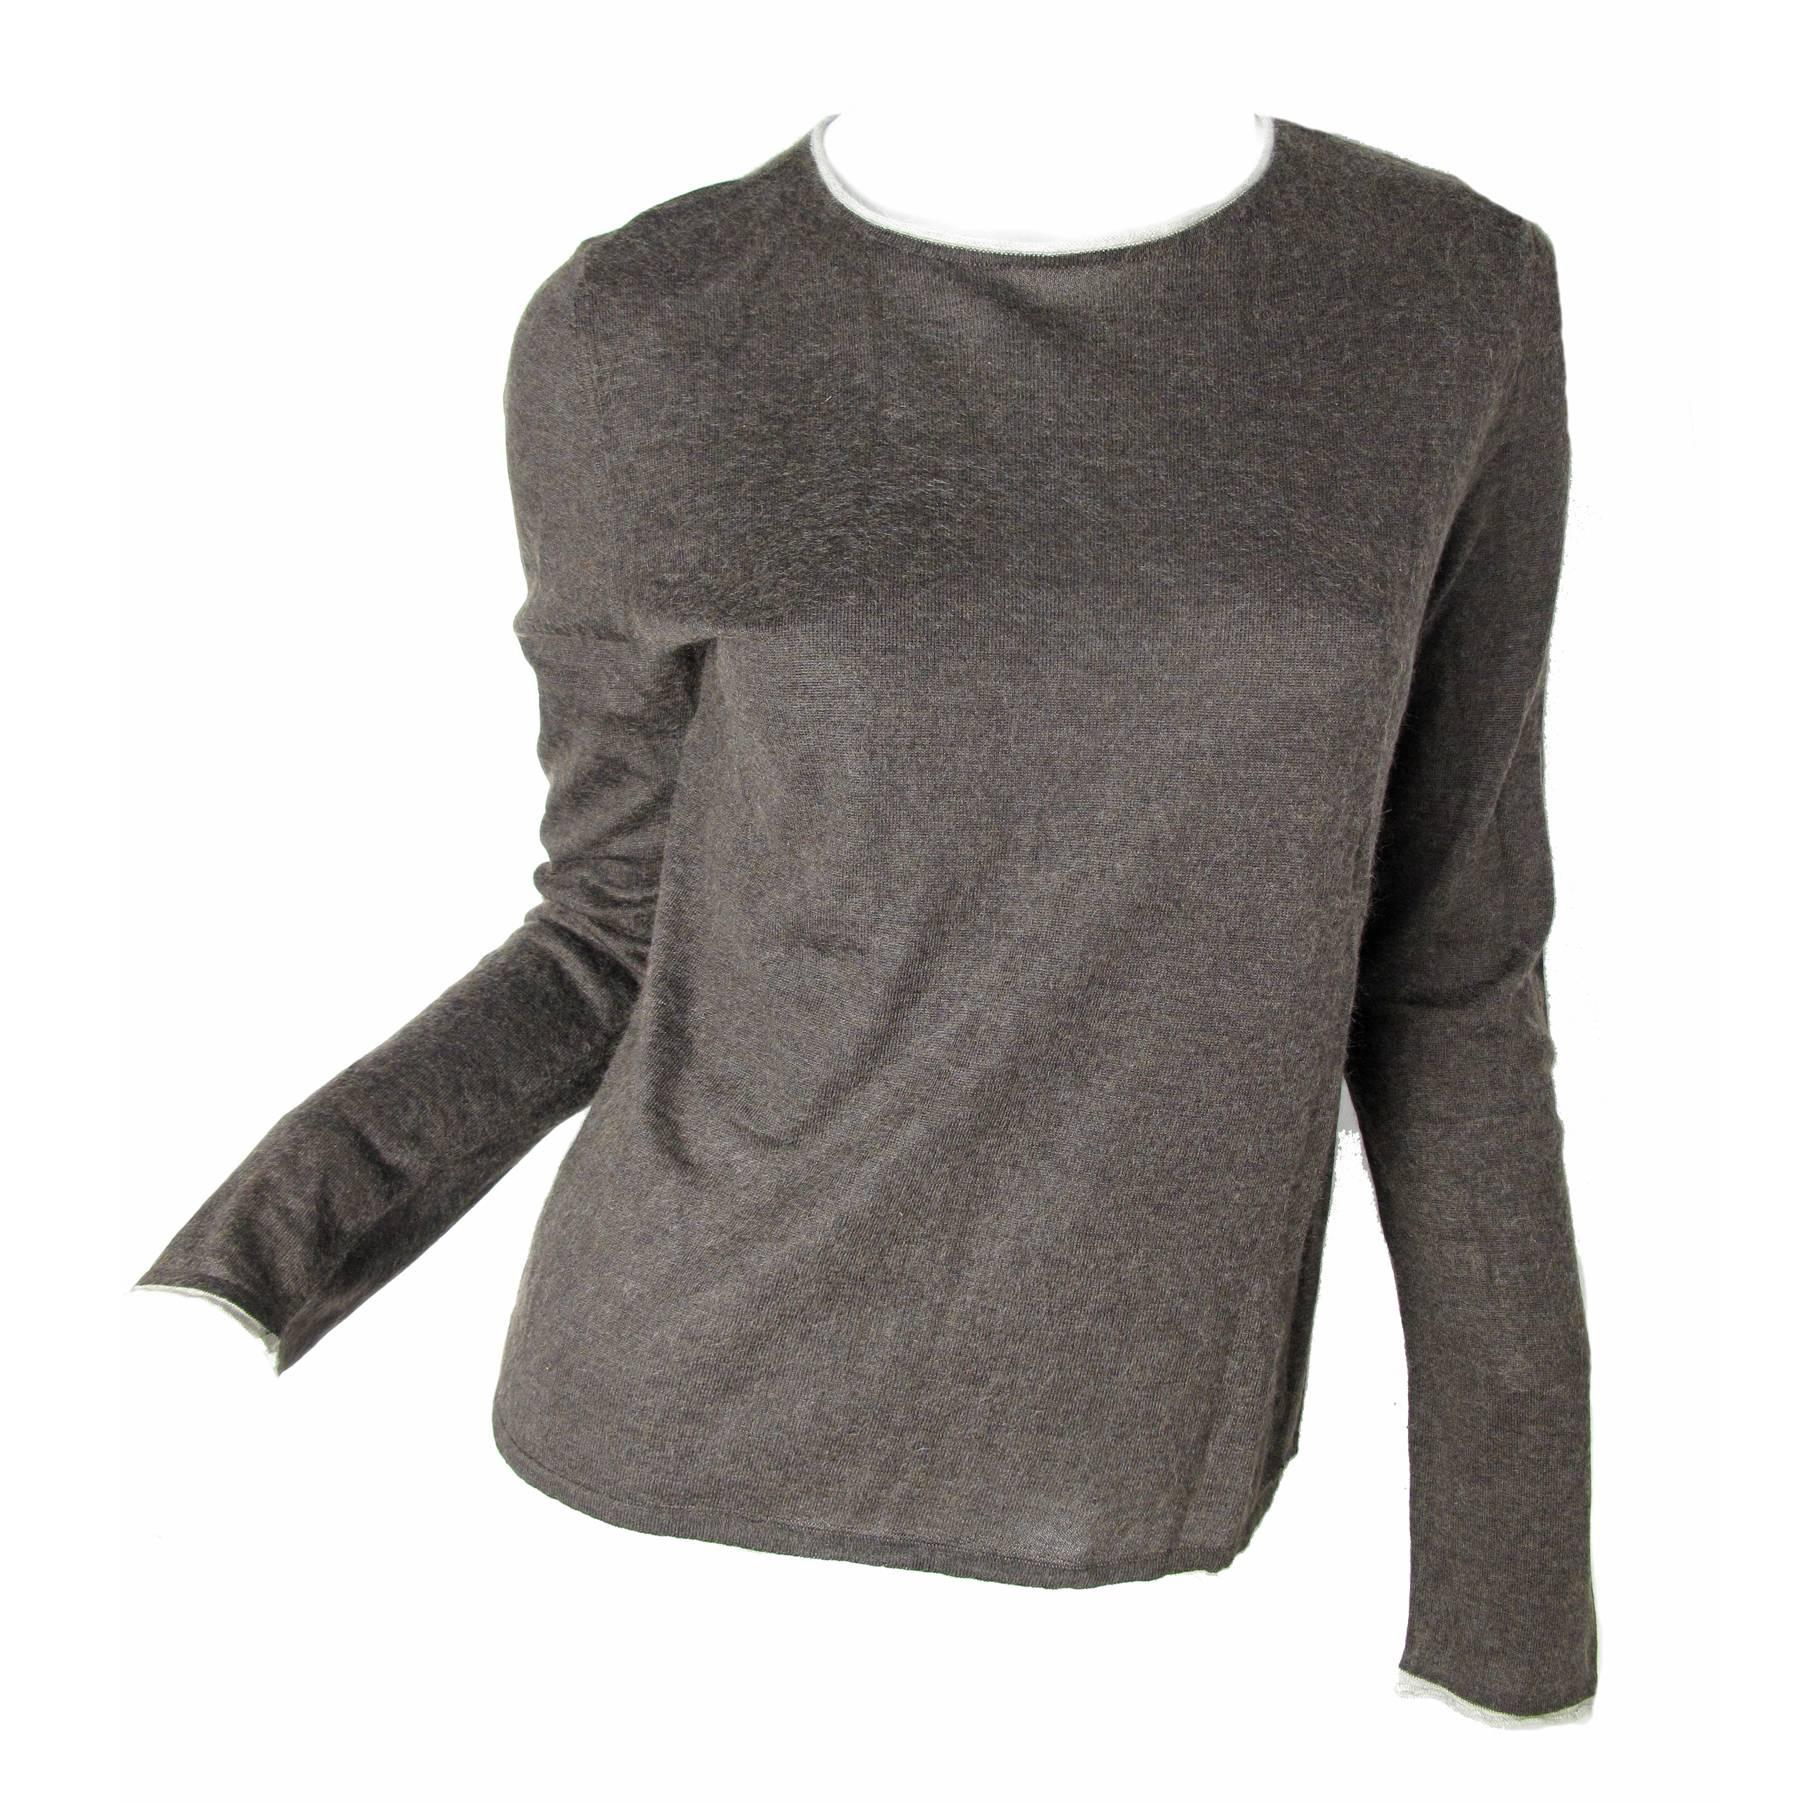 Chanel Cashmere/Silk Brown Sweater with Grey Piping at Neck and Cuffs